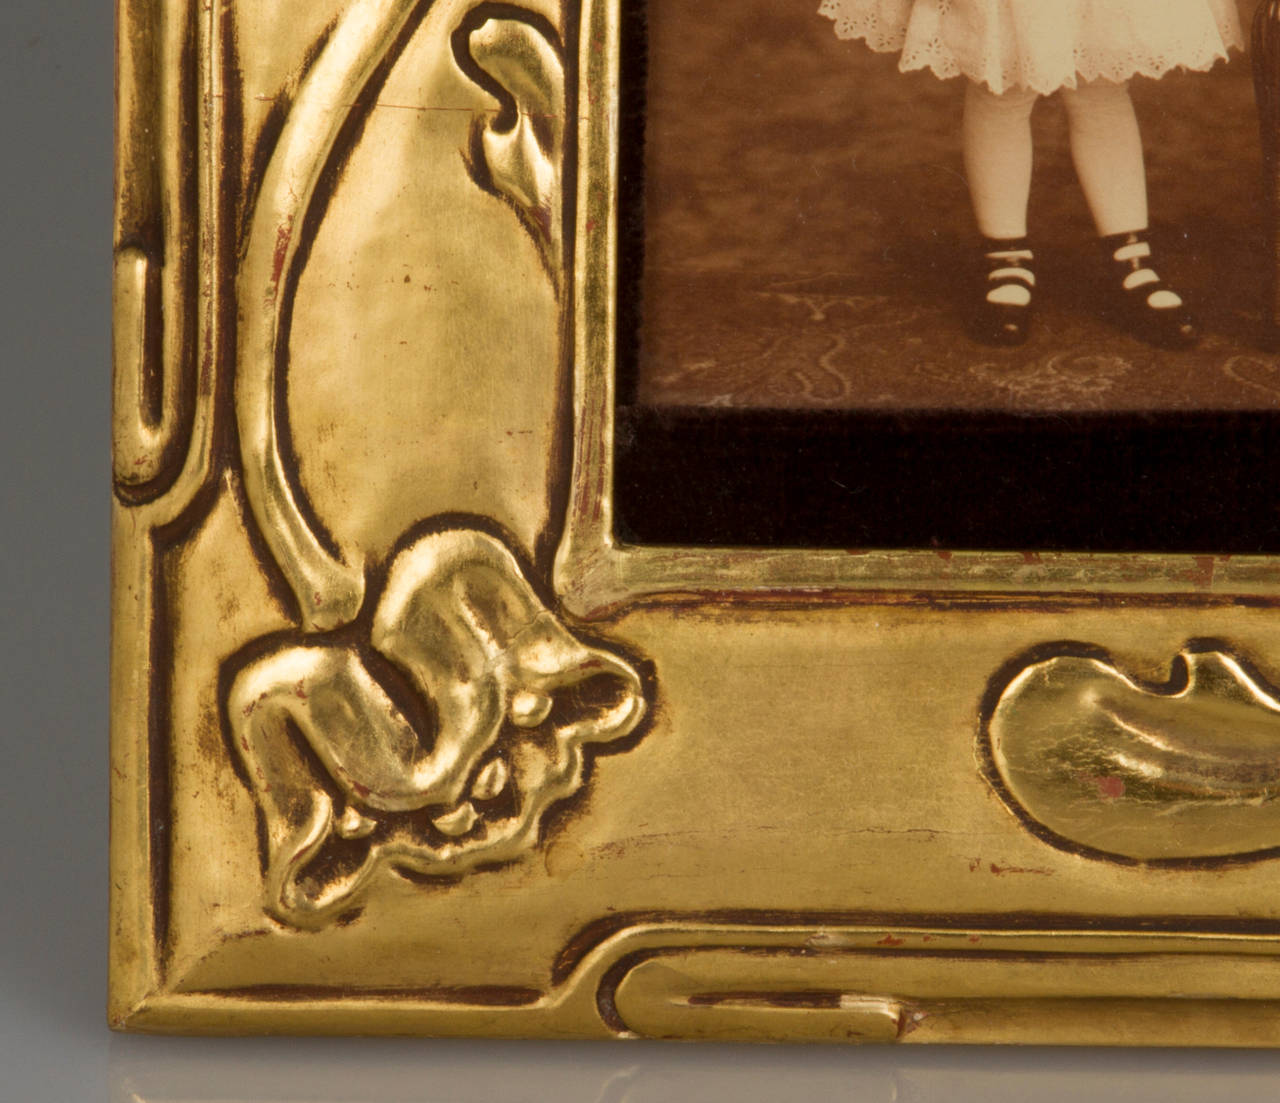 This is a beautifully carved frame. The photos are held in place by a brown velvet liner. These are the original photos that came with the frame. There is a Carson Pirie Scott & Company label on the back, a premier department store in its day.